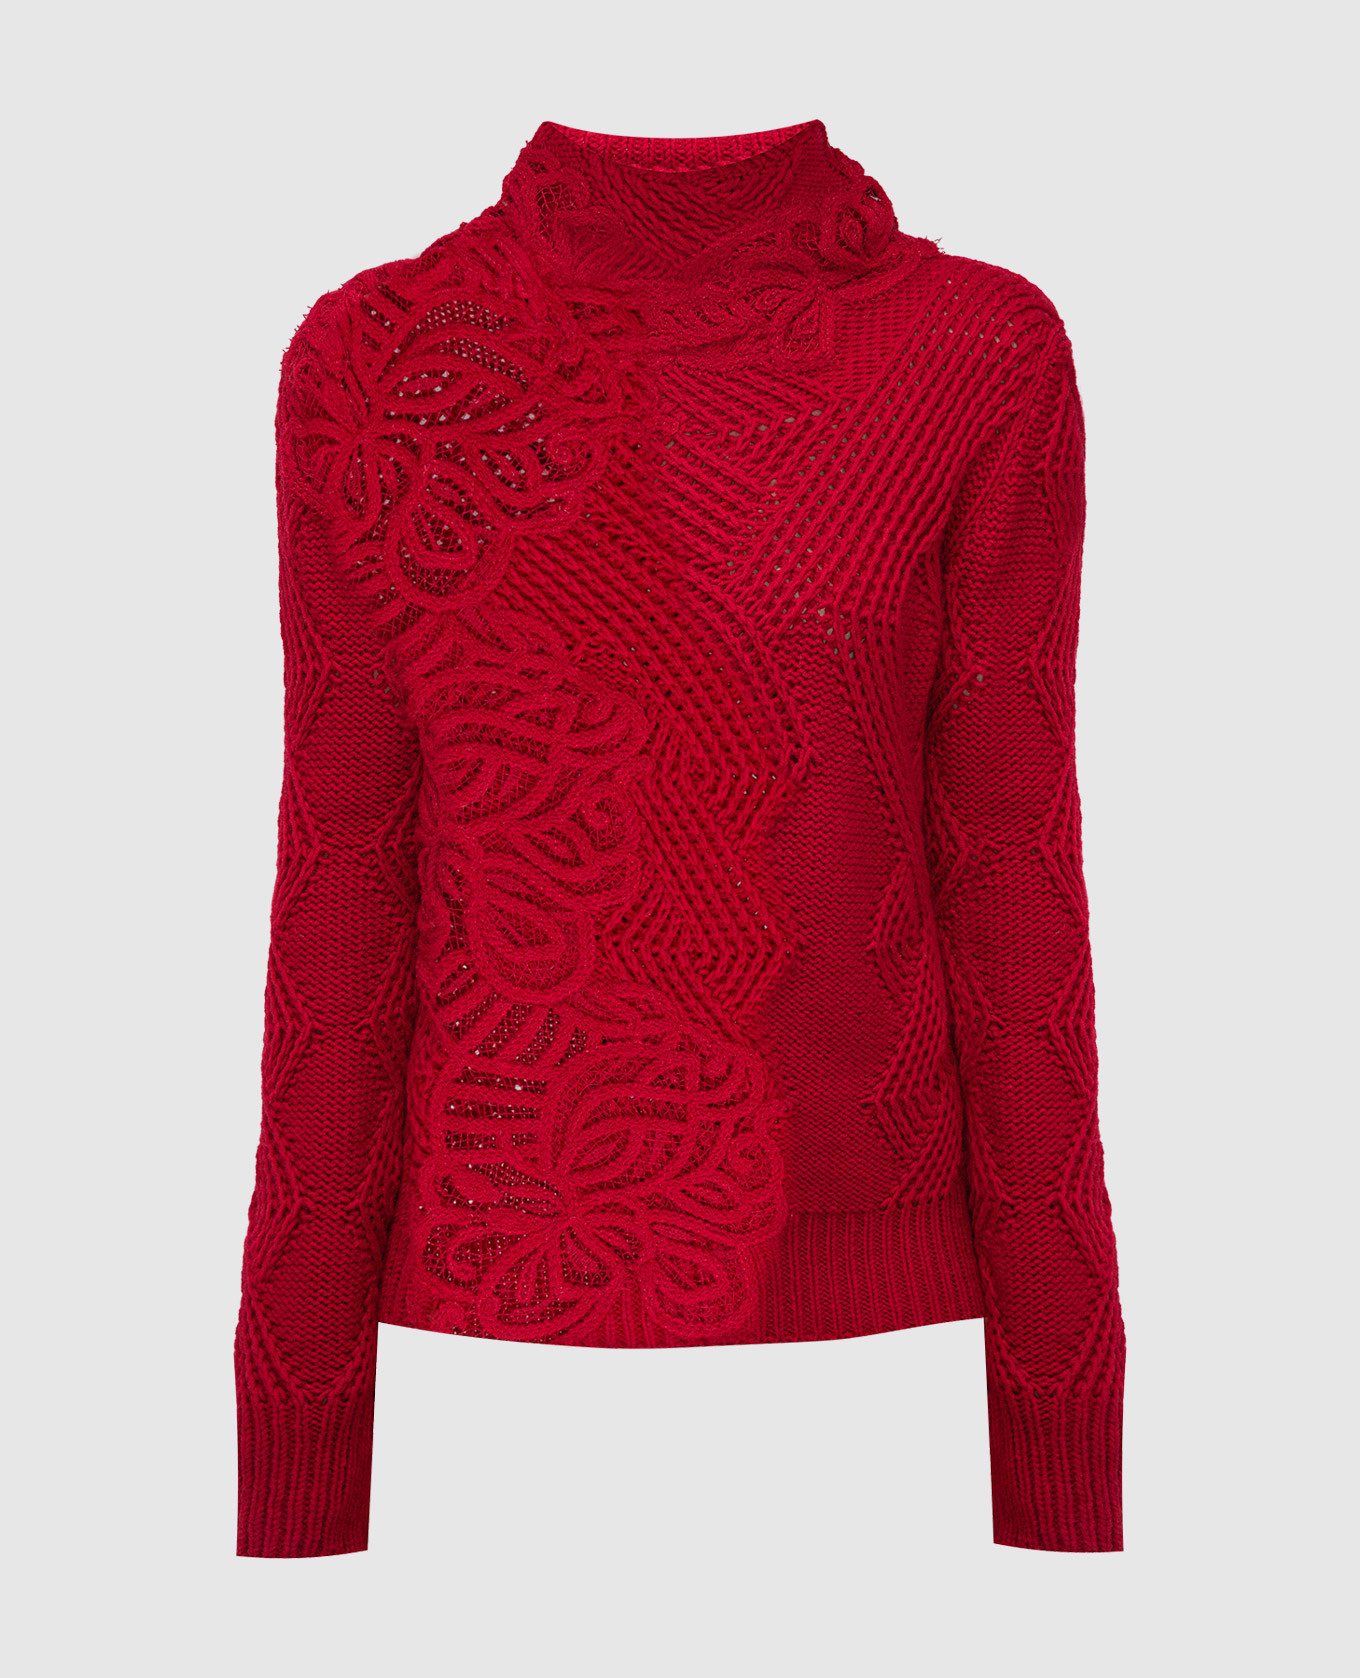 Red sweater in a textured pattern